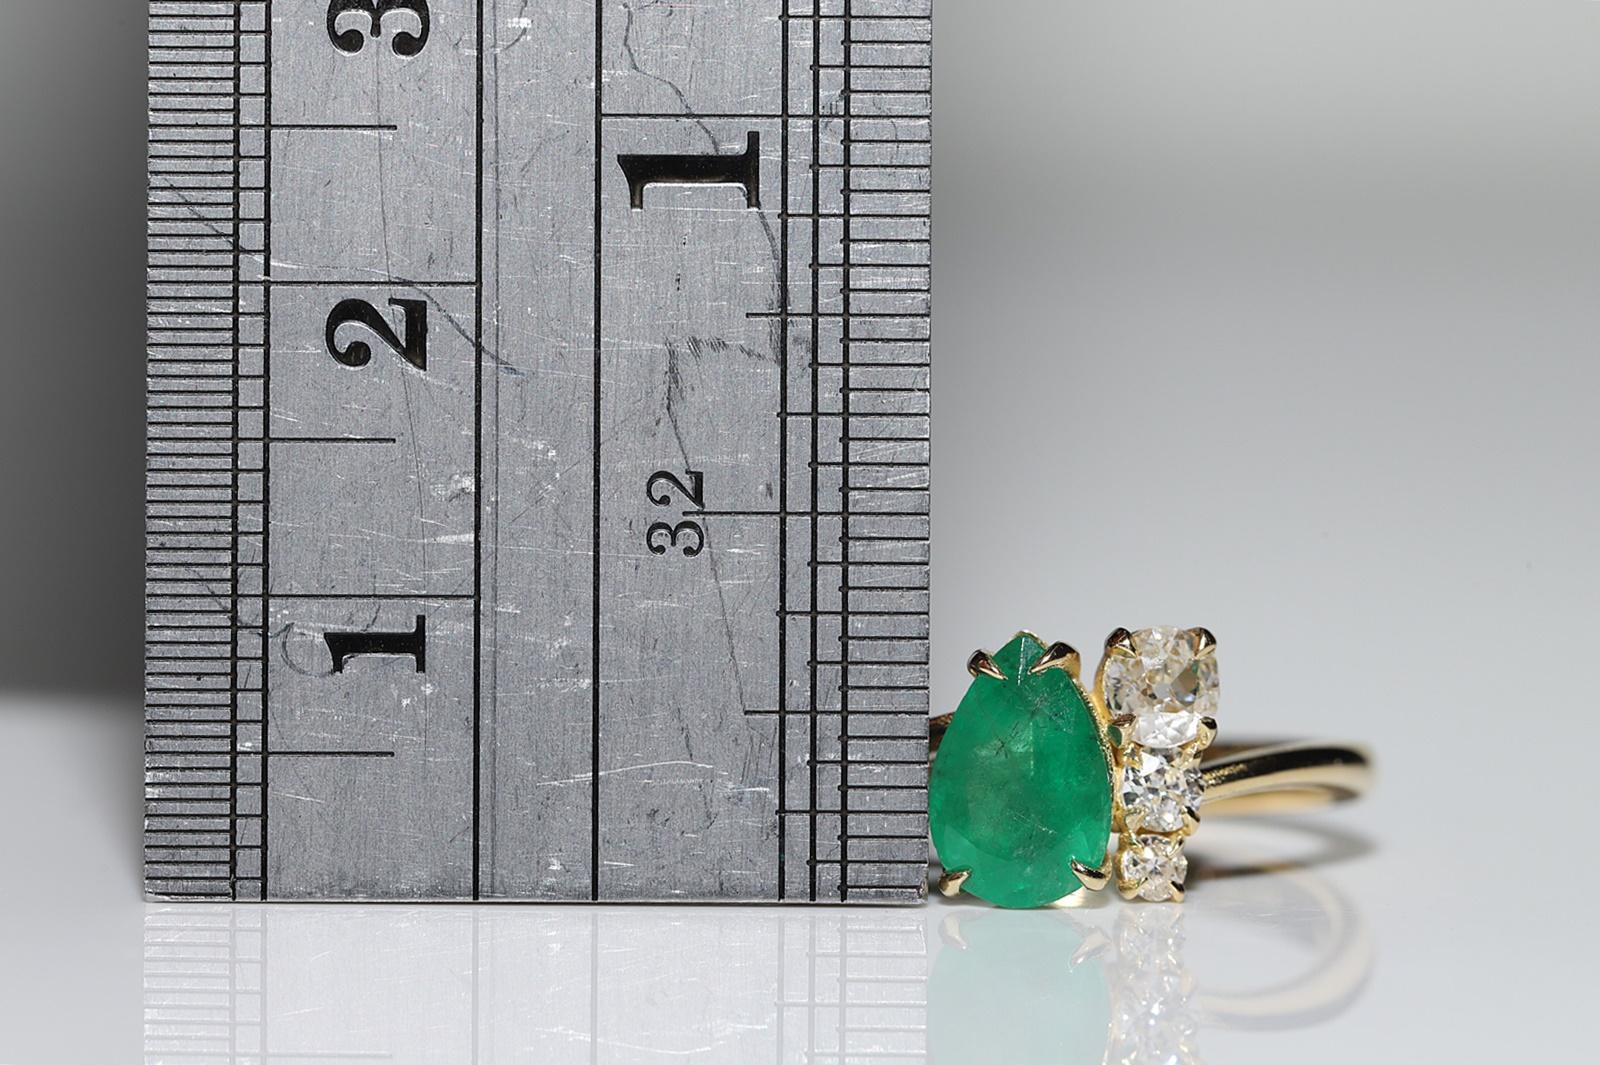 New Made 18k Gold Natural Old Cut Diamond And Pear Cut Emerald Ring  In New Condition For Sale In Fatih/İstanbul, 34